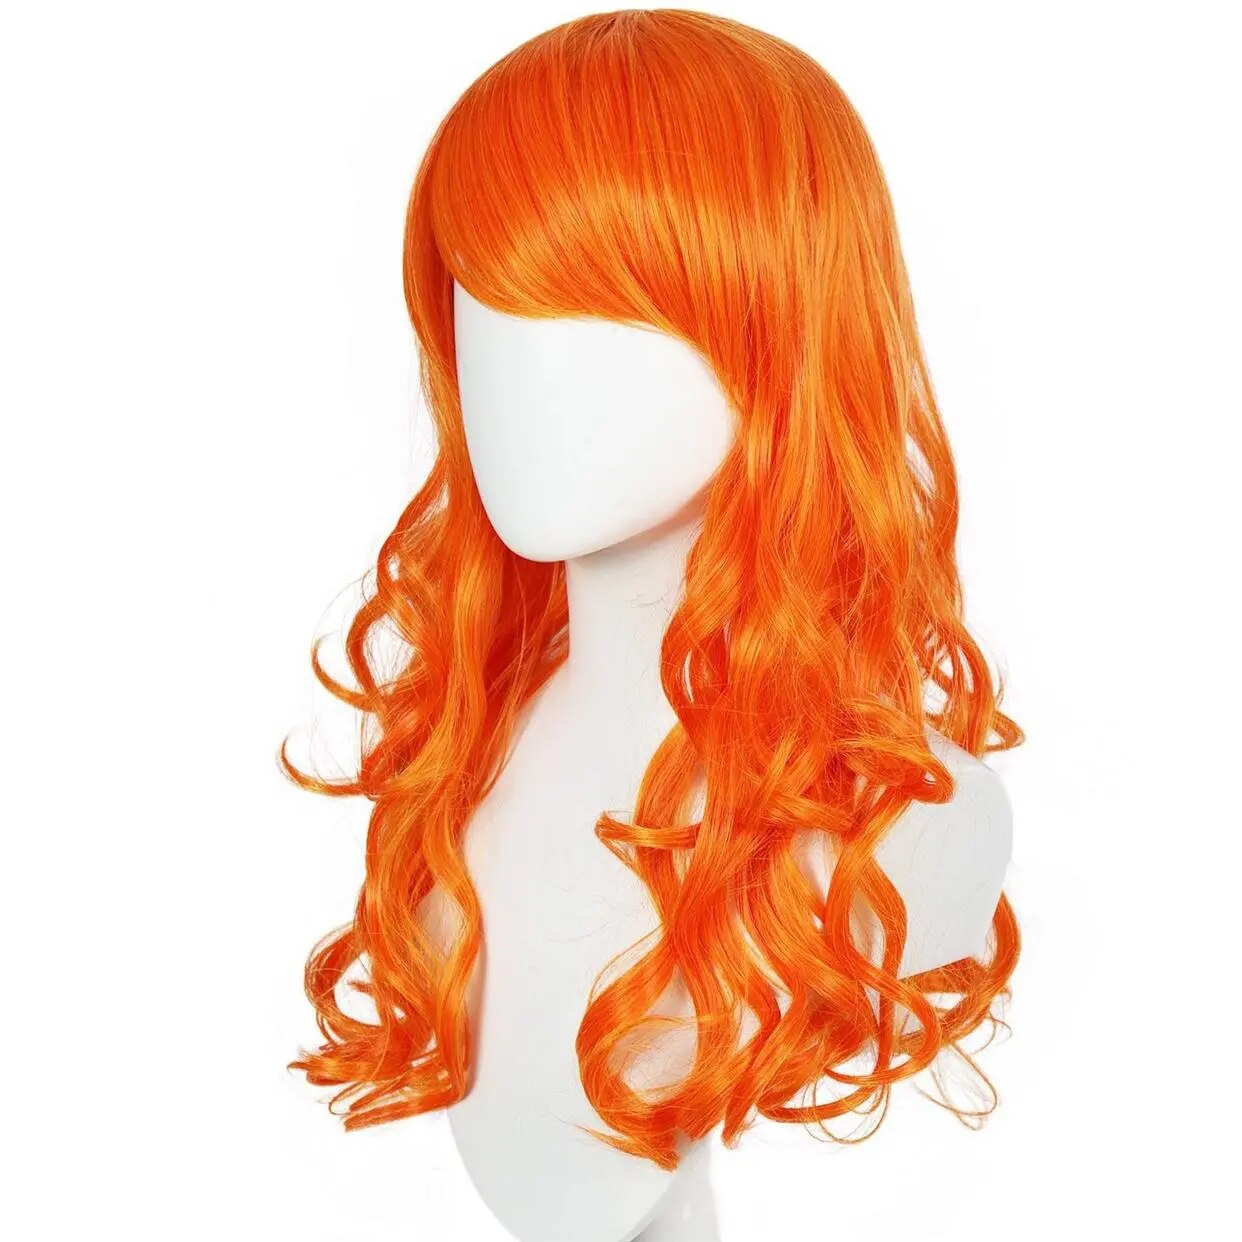 Anime One Piece Film Red Nami Cosplay Costume with Hairs Shoes Full Set Costume Made Any Size for Unisex